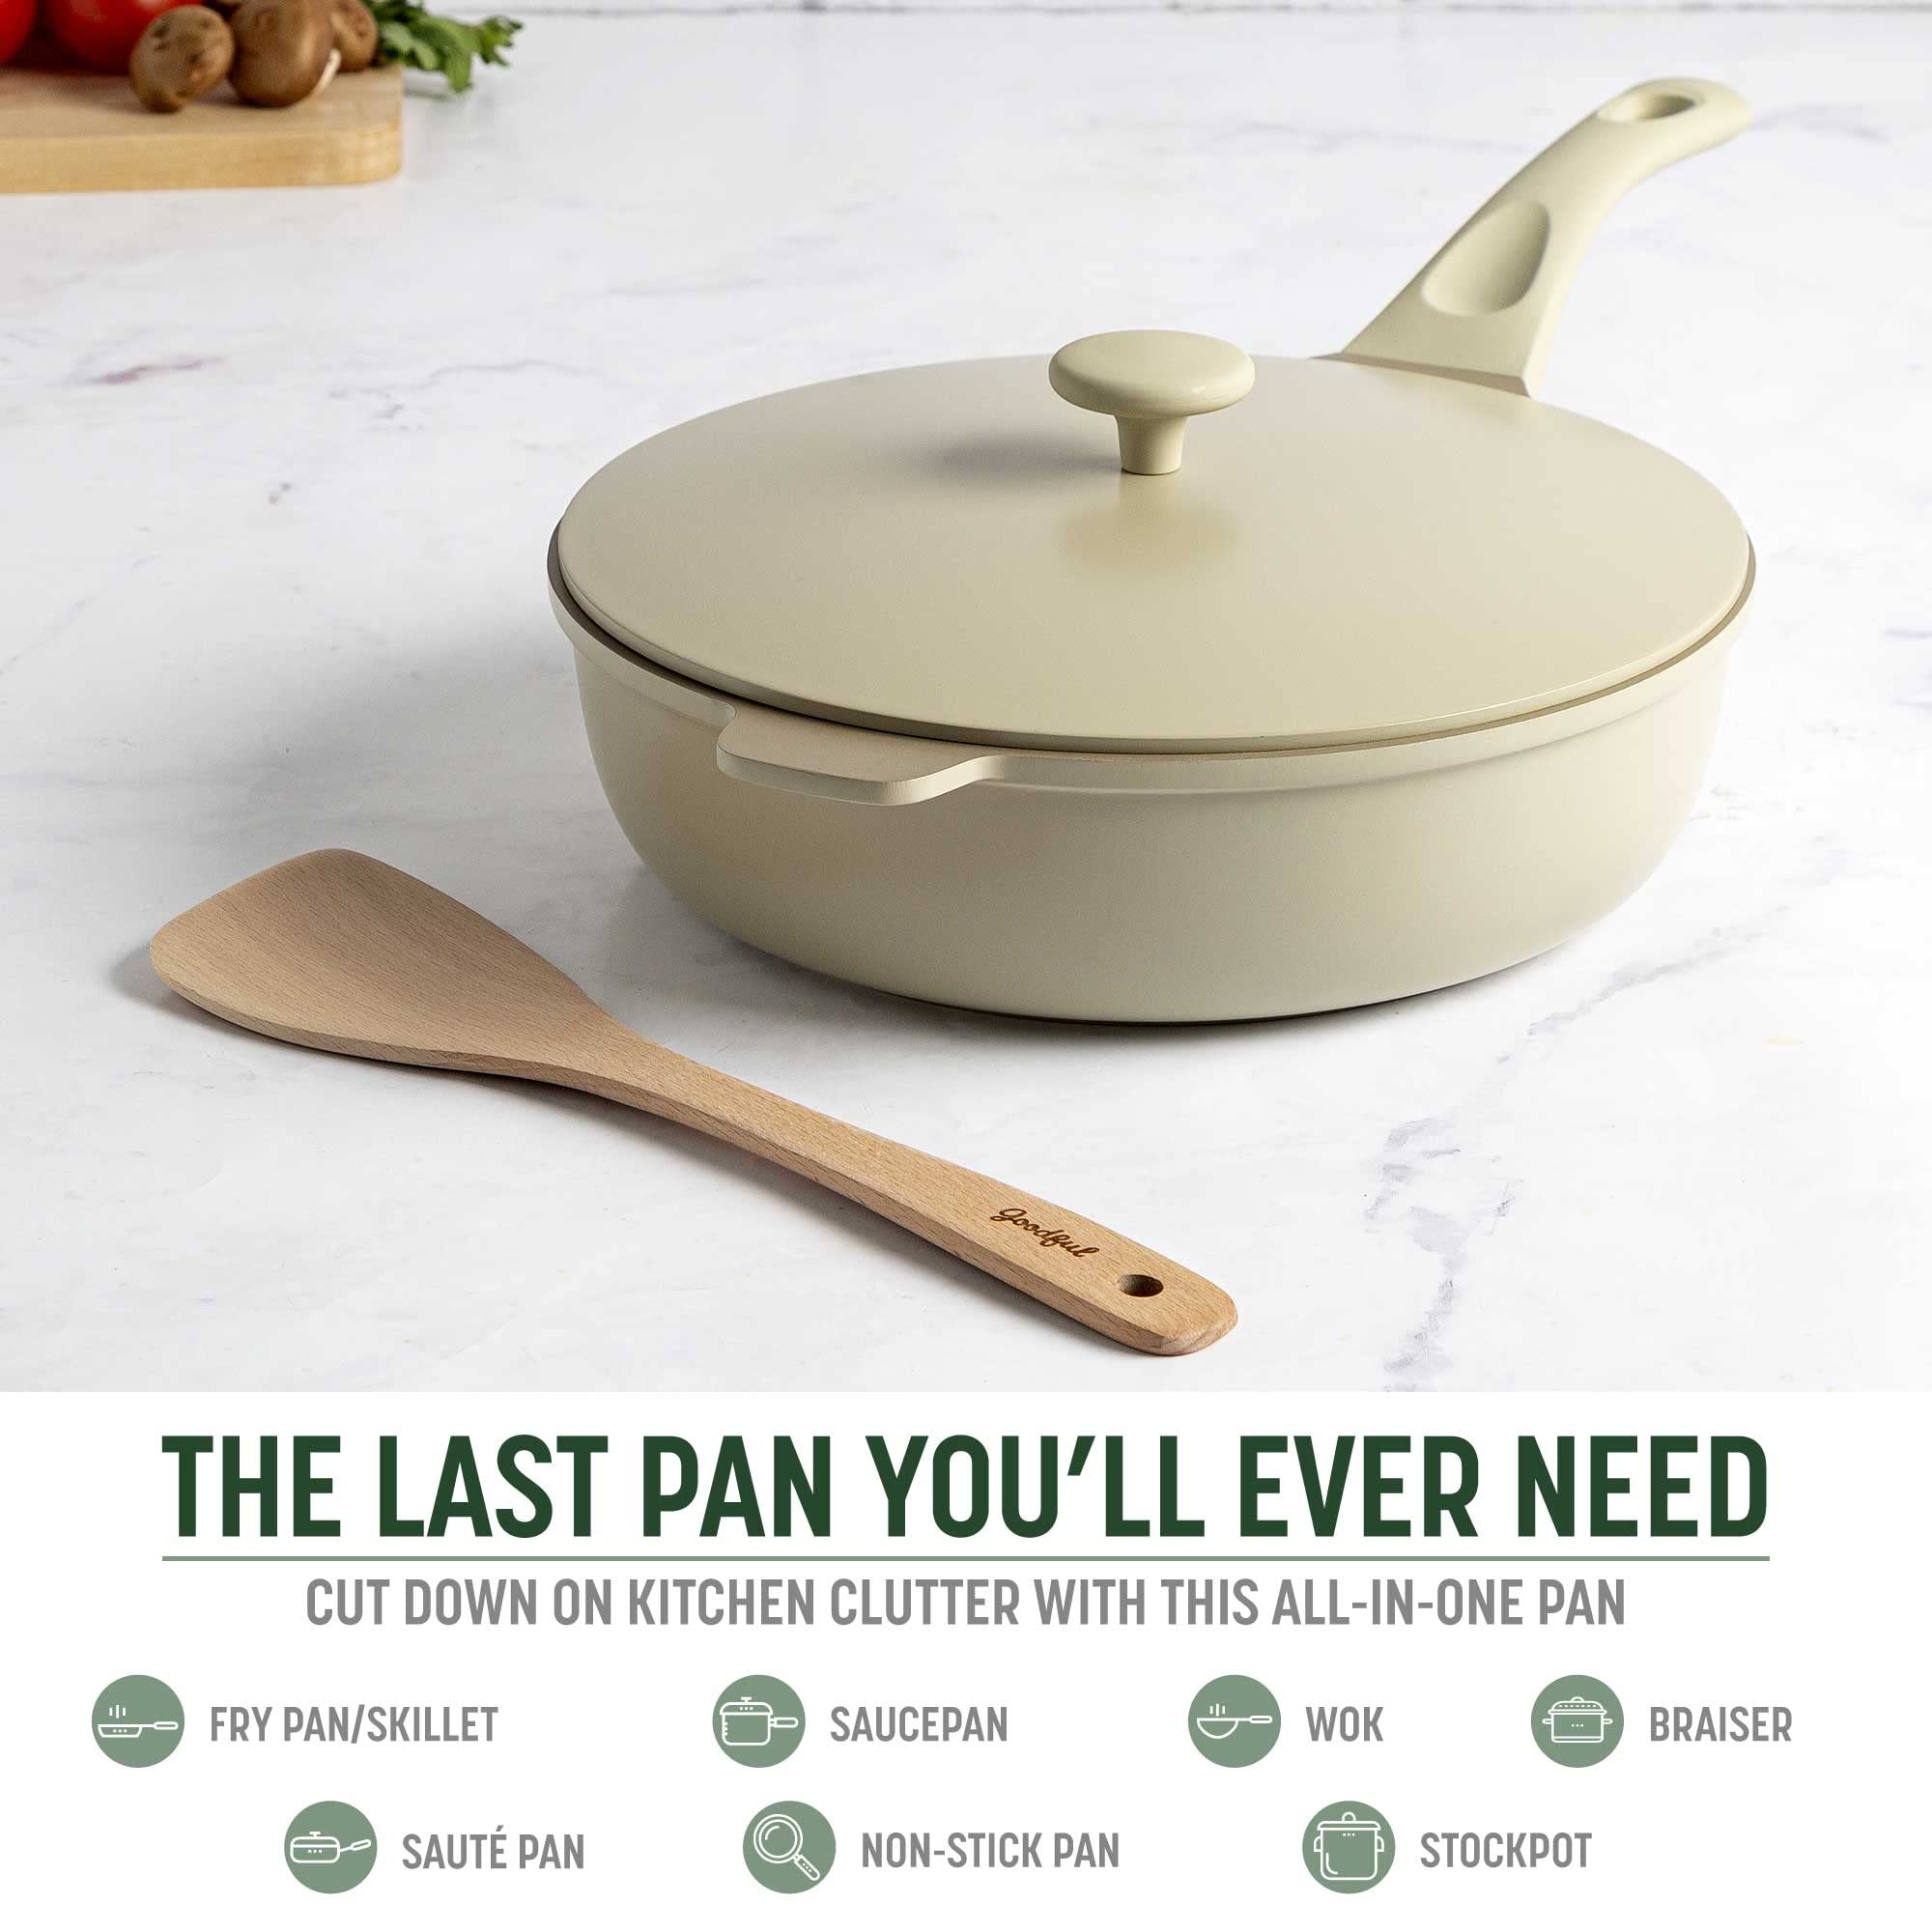 Goodful All-in-One Pan, Multilayer Nonstick, High-Performance Cast Construction, Multipurpose Design Replaces Multiple Pots and Pans, Dishwasher Safe Cookware, 11-Inch, 4.4-Quart Capacity, Linen